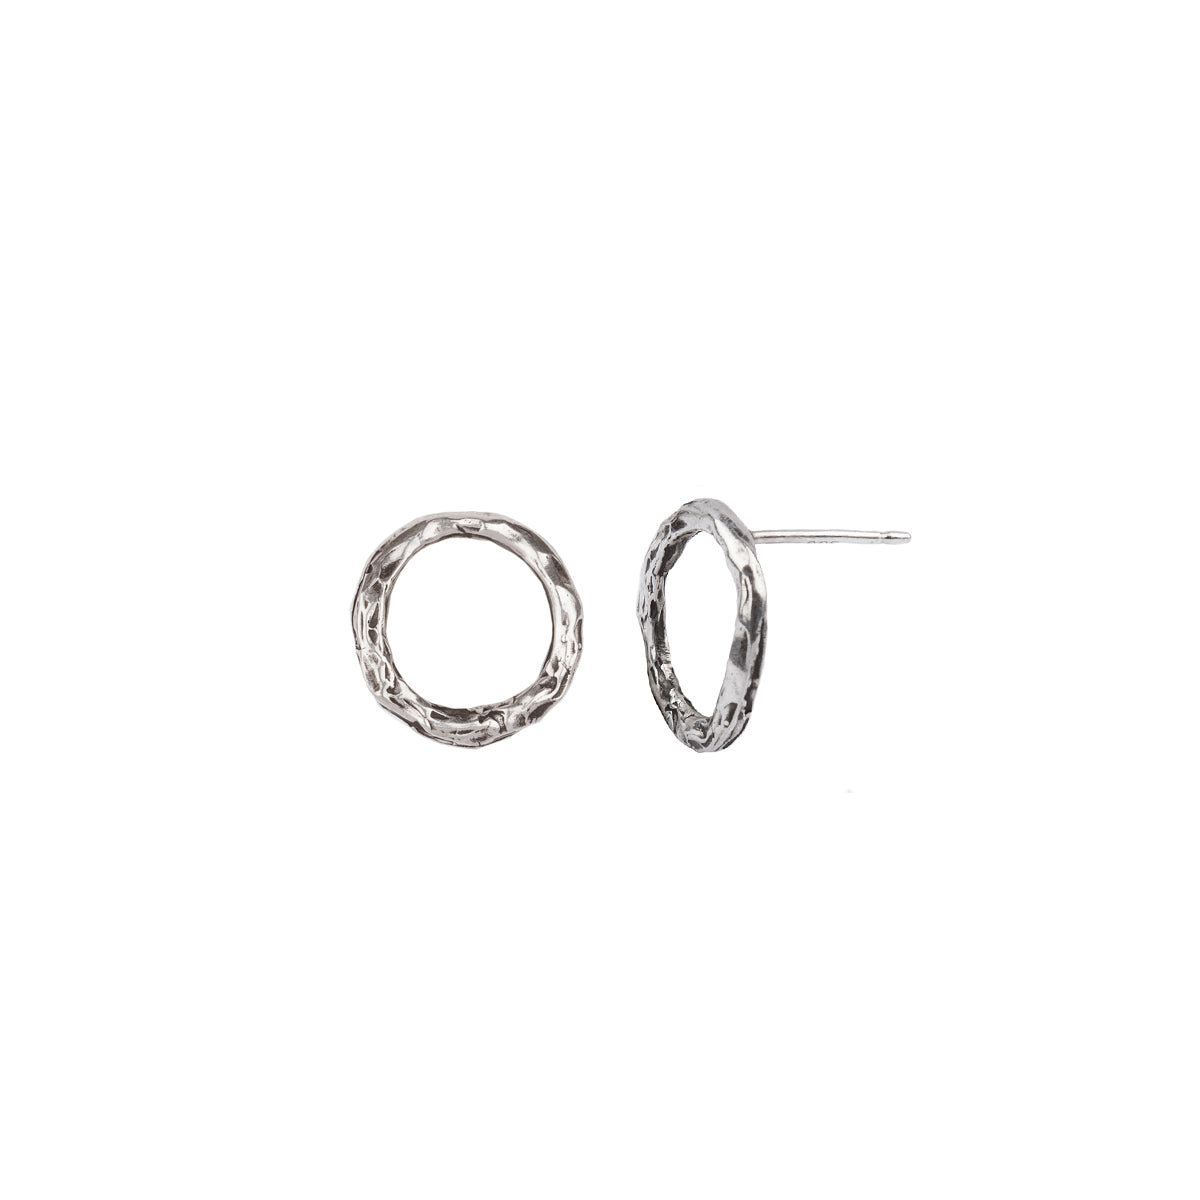 A set of sterling silver extra small open circle studs.